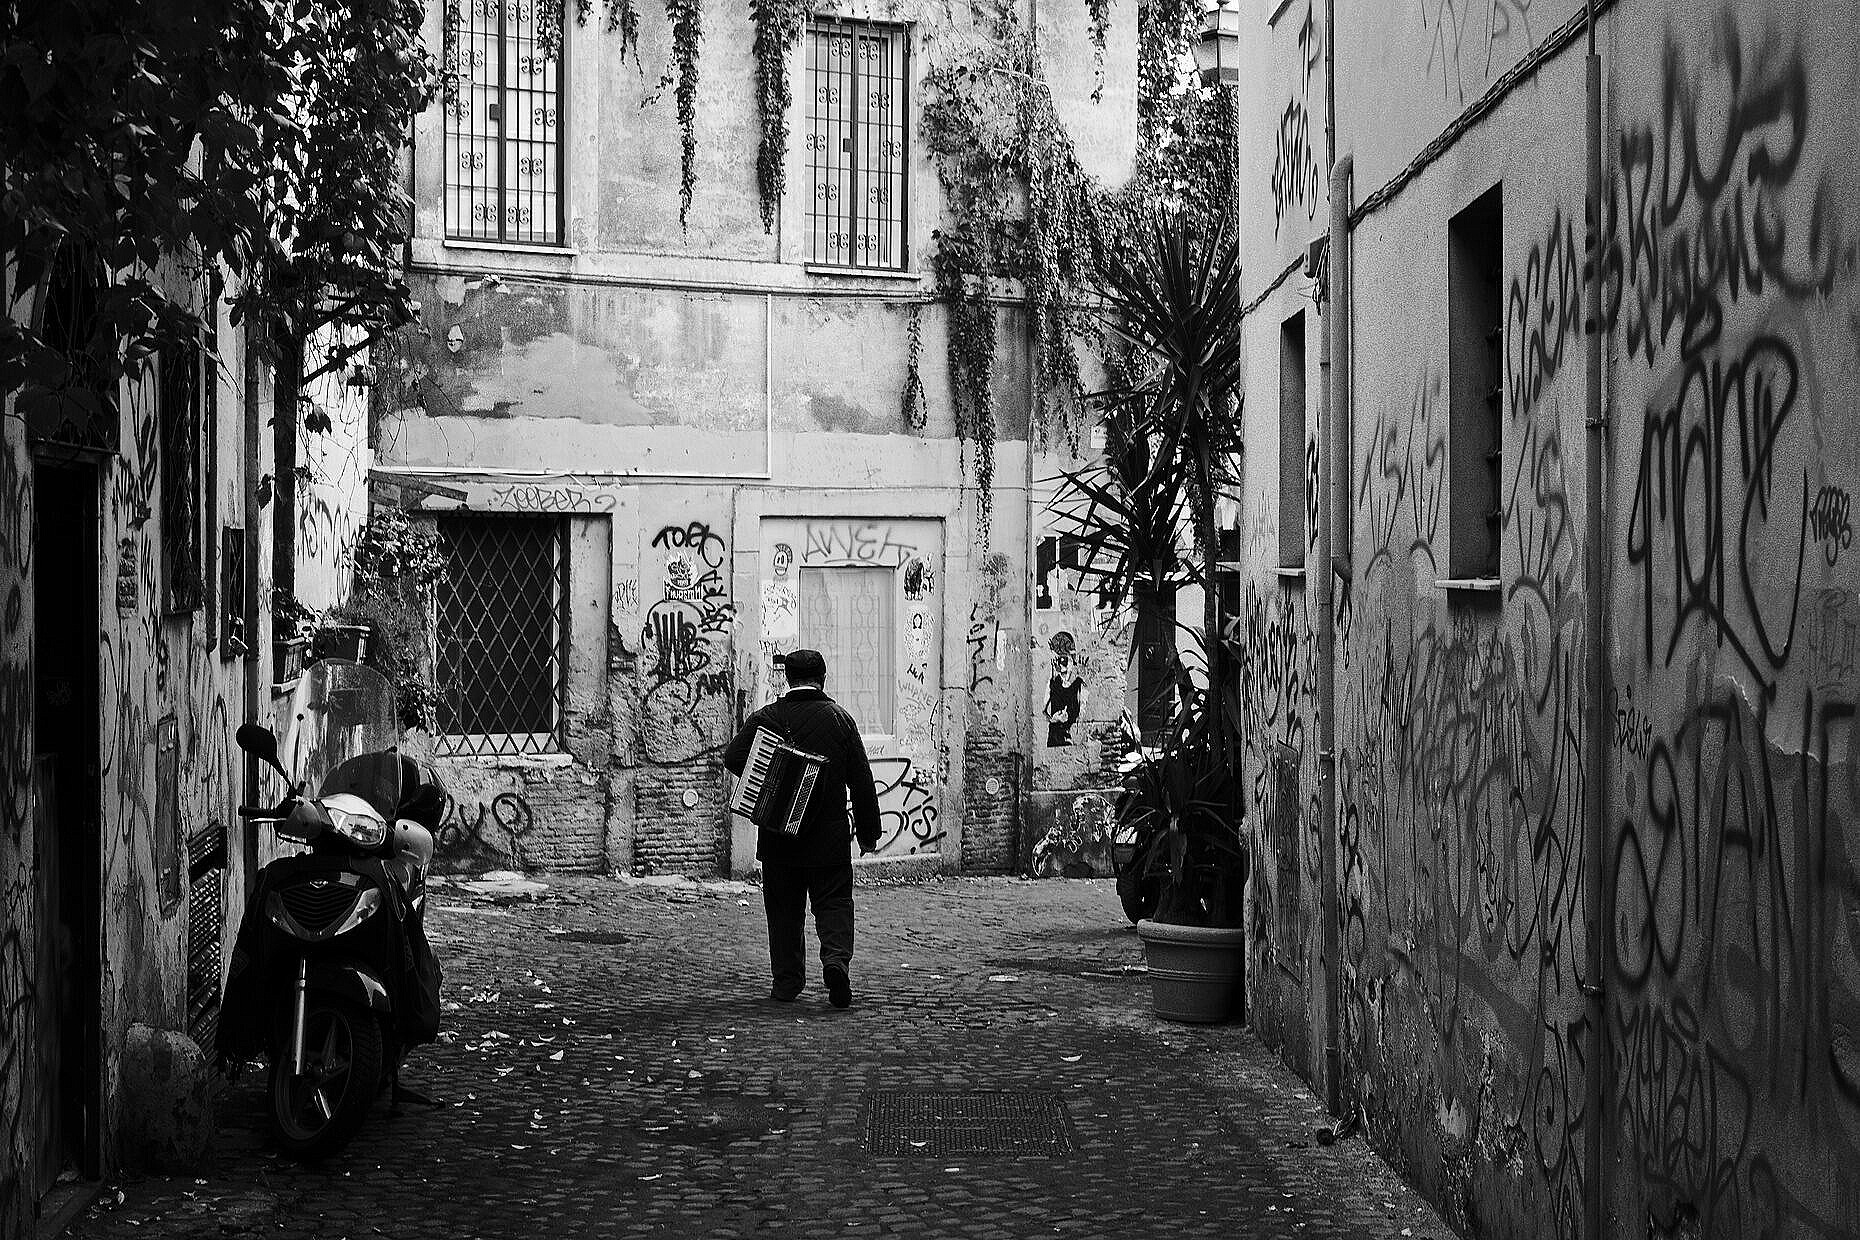 Street musician walking home alone through a picturesque alleyway in Trastevere in Rome.